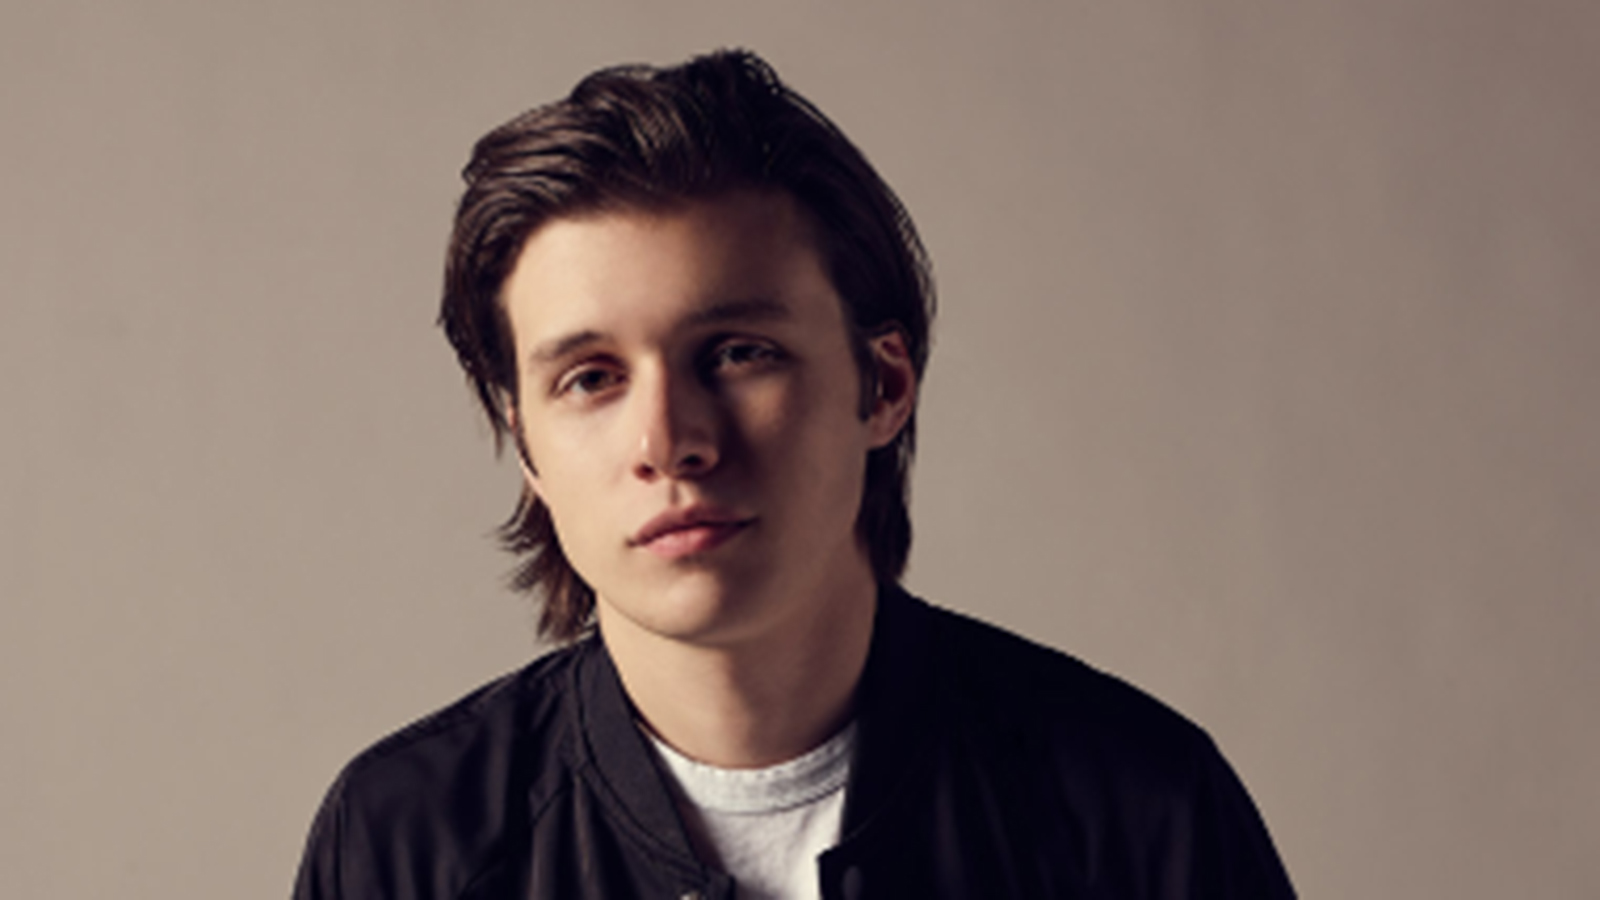 Hrc To Honor Actor Nick Robinson With The Ally For Equality Award 